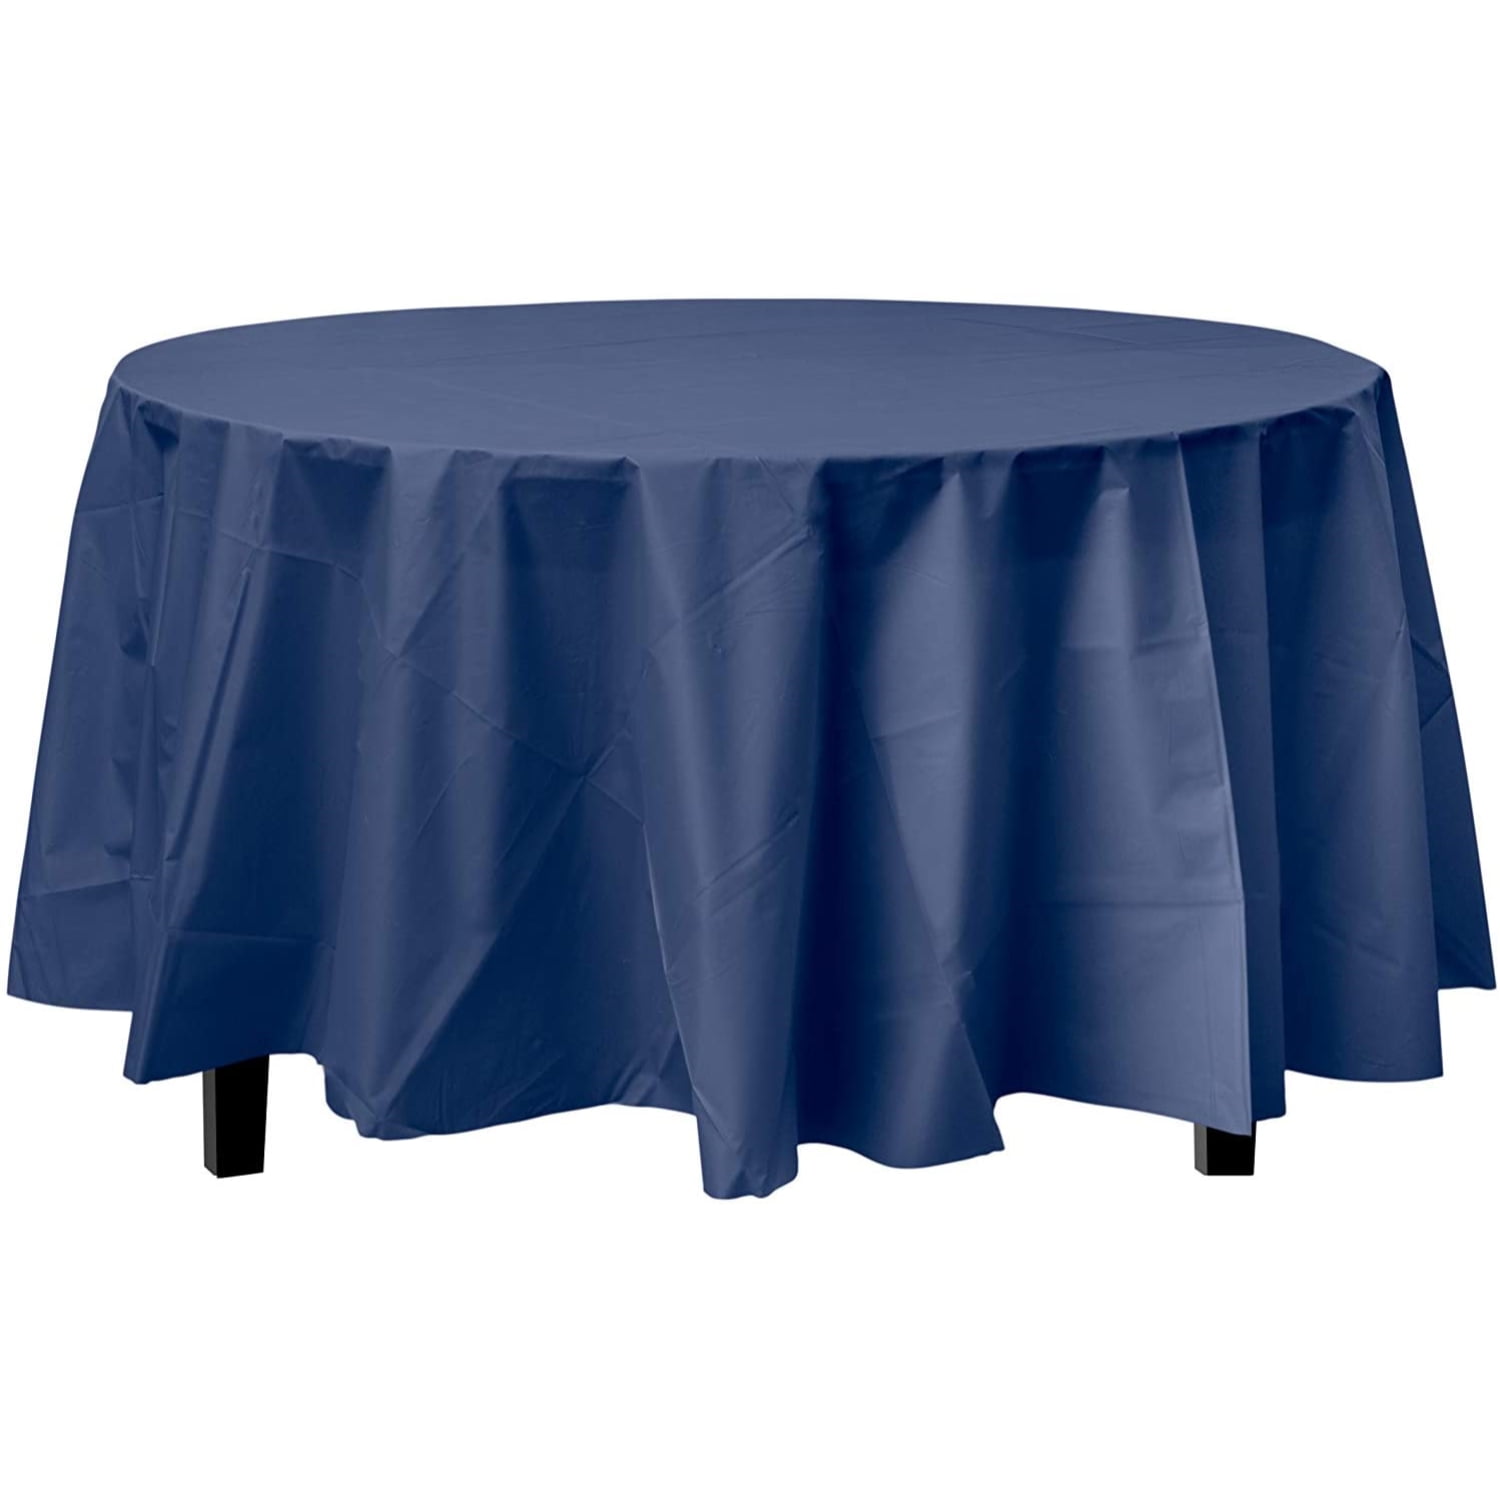 Bulk Premium Plastic Disposable 84 Inch, What Size Tablecloth Do I Need For A 44 Inch Round Table